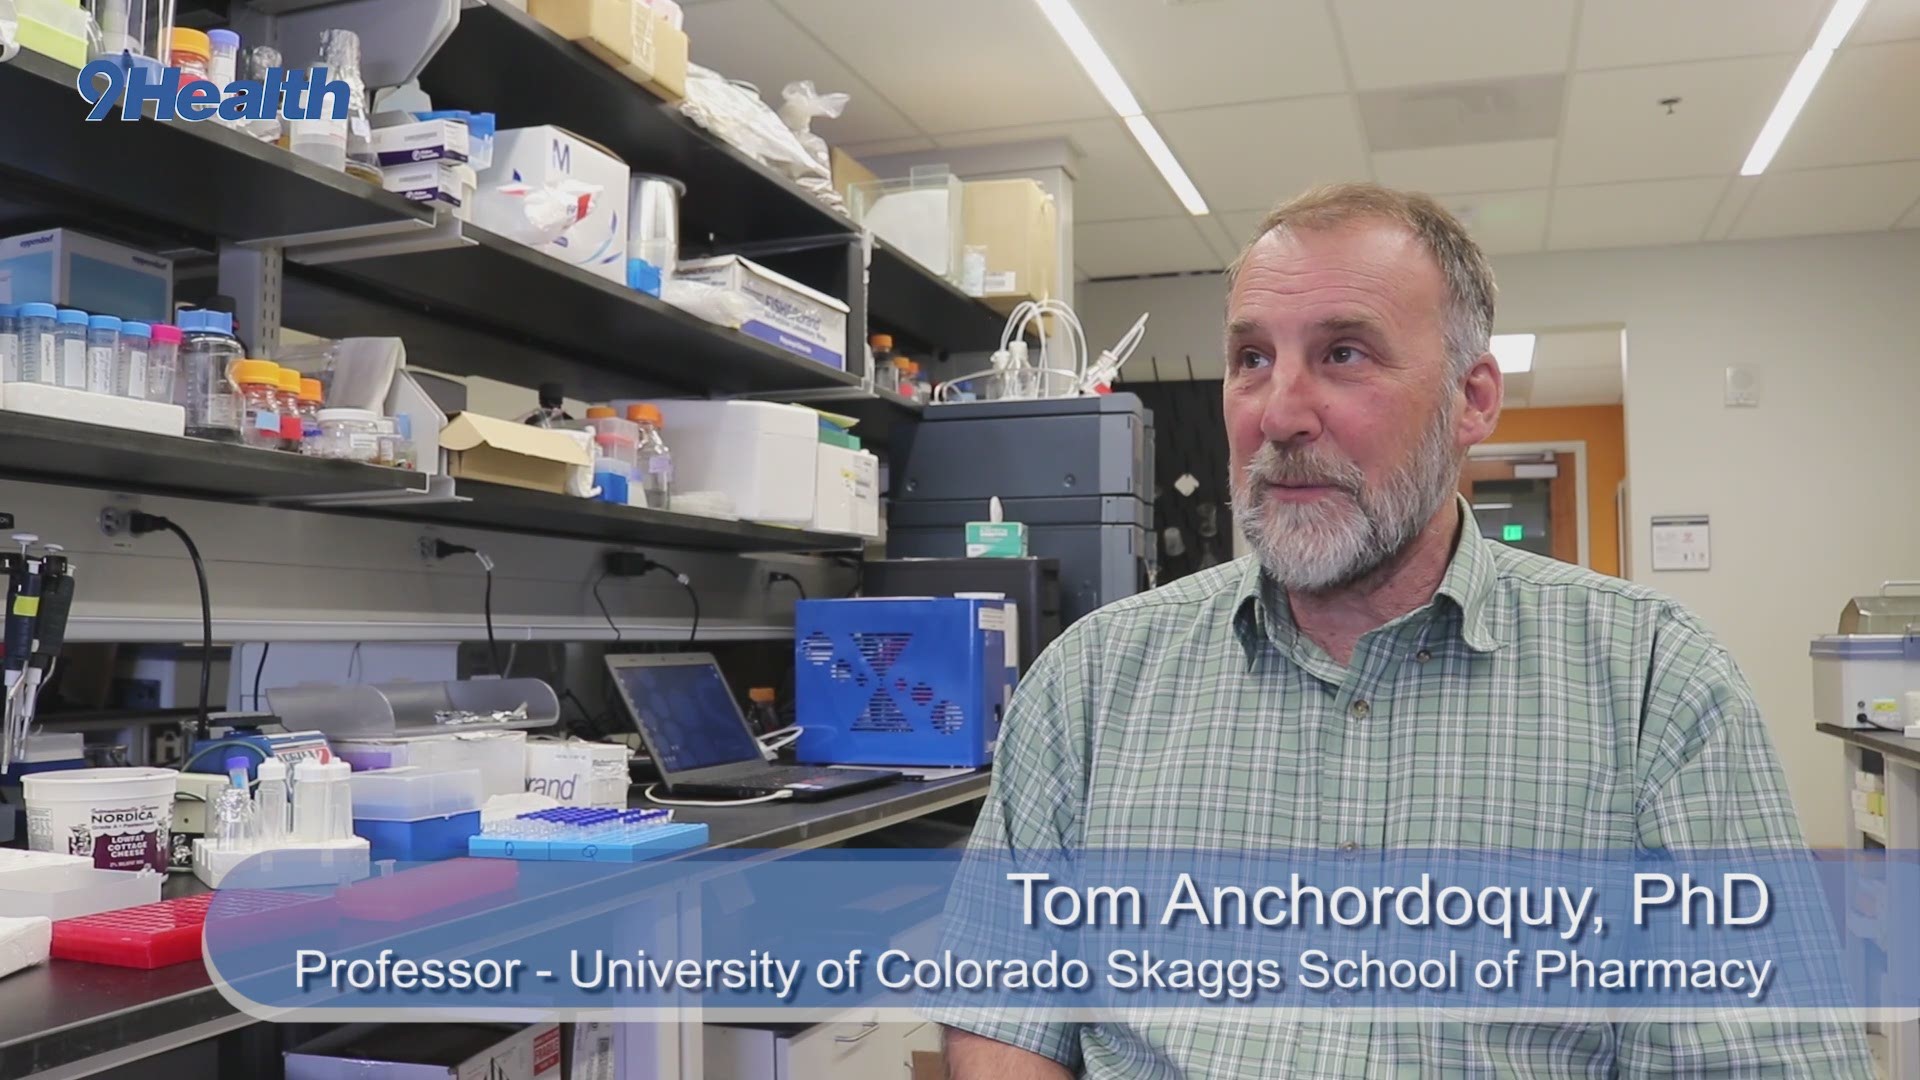 A professor at the University of Colorado Skaggs School of Pharmacy, Tom Anchordoquy, PhD, and Dan Abrams, MD and CEO of Cerebral Therapeutics, have modified an epilepsy drug and changed the way it’s delivered to better the lives of these patients. It is in a clinical trial right now.